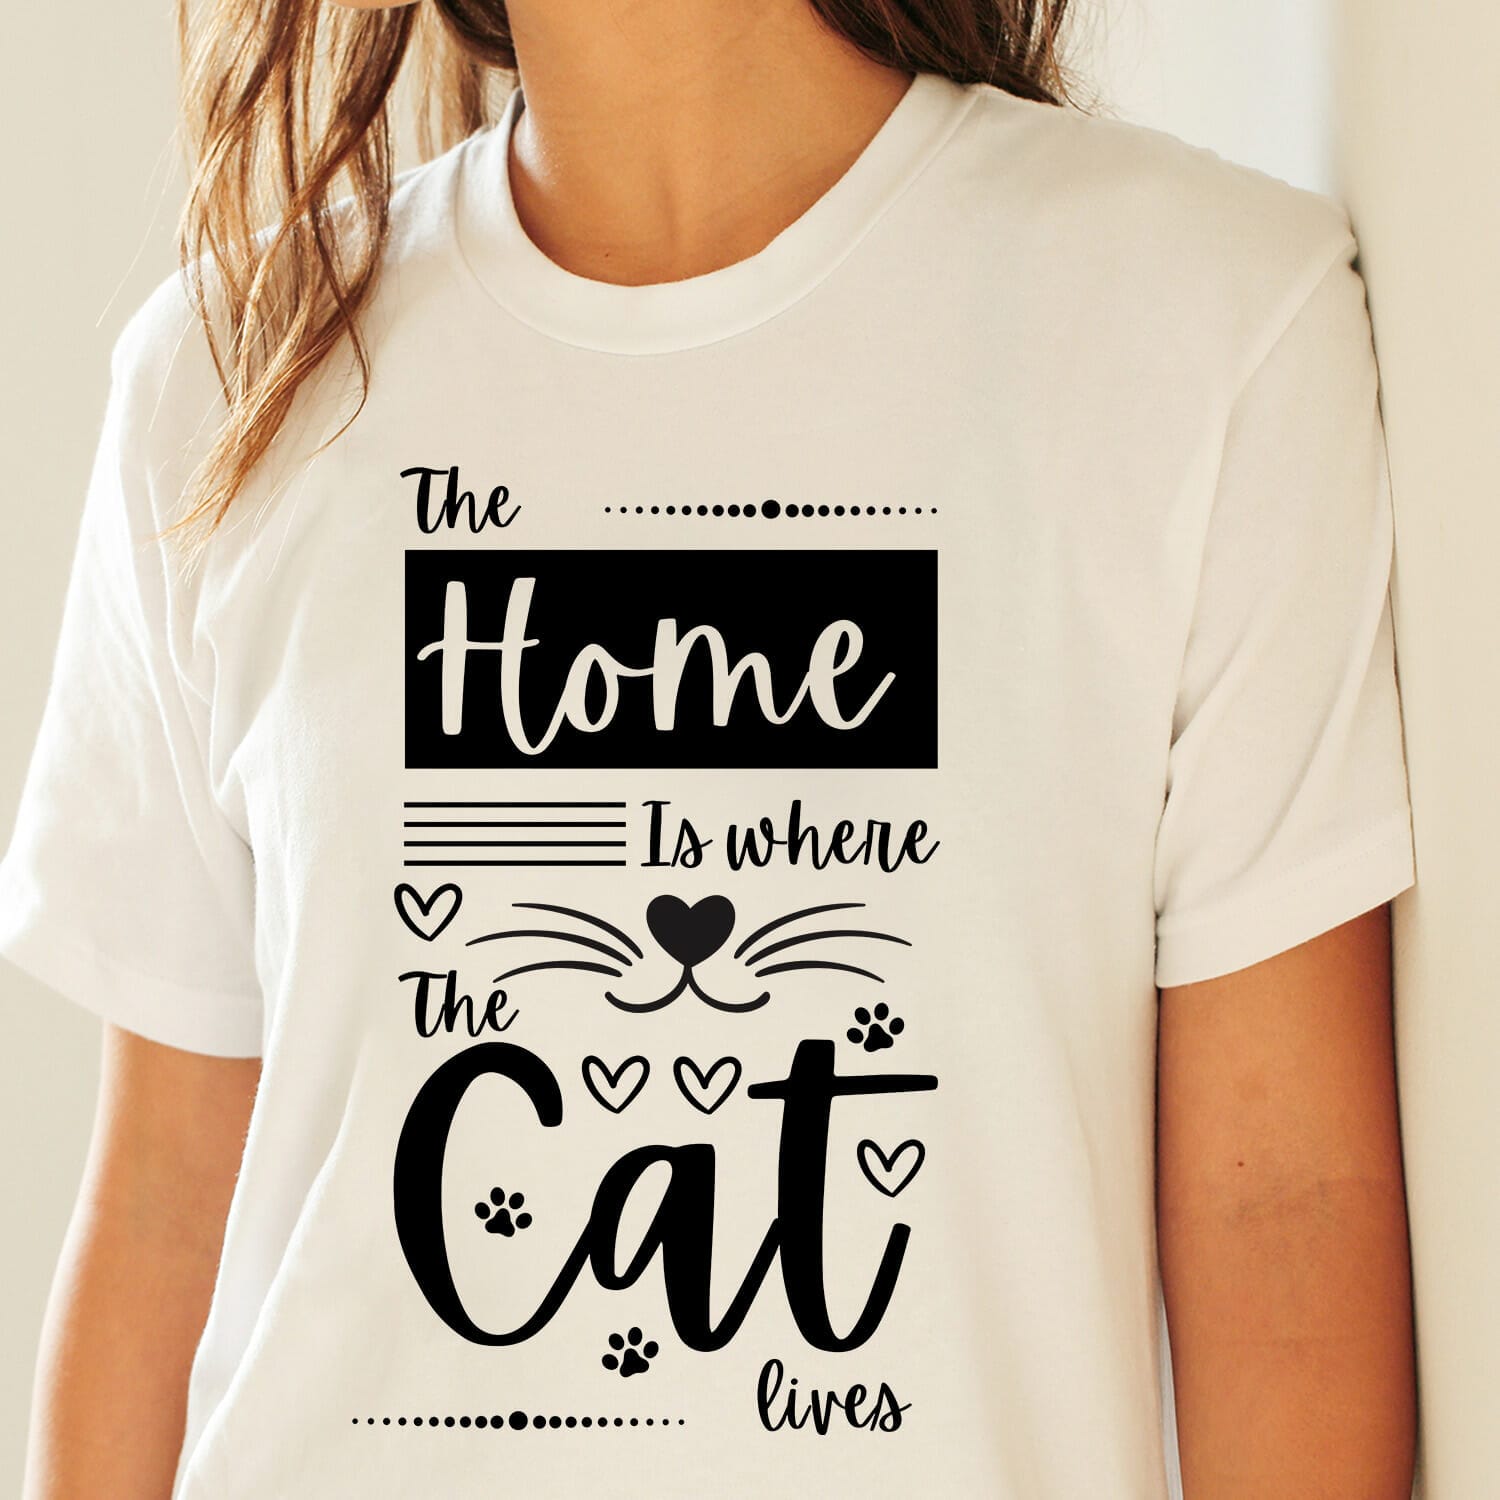 The Home is where the cat lives T-shirt design